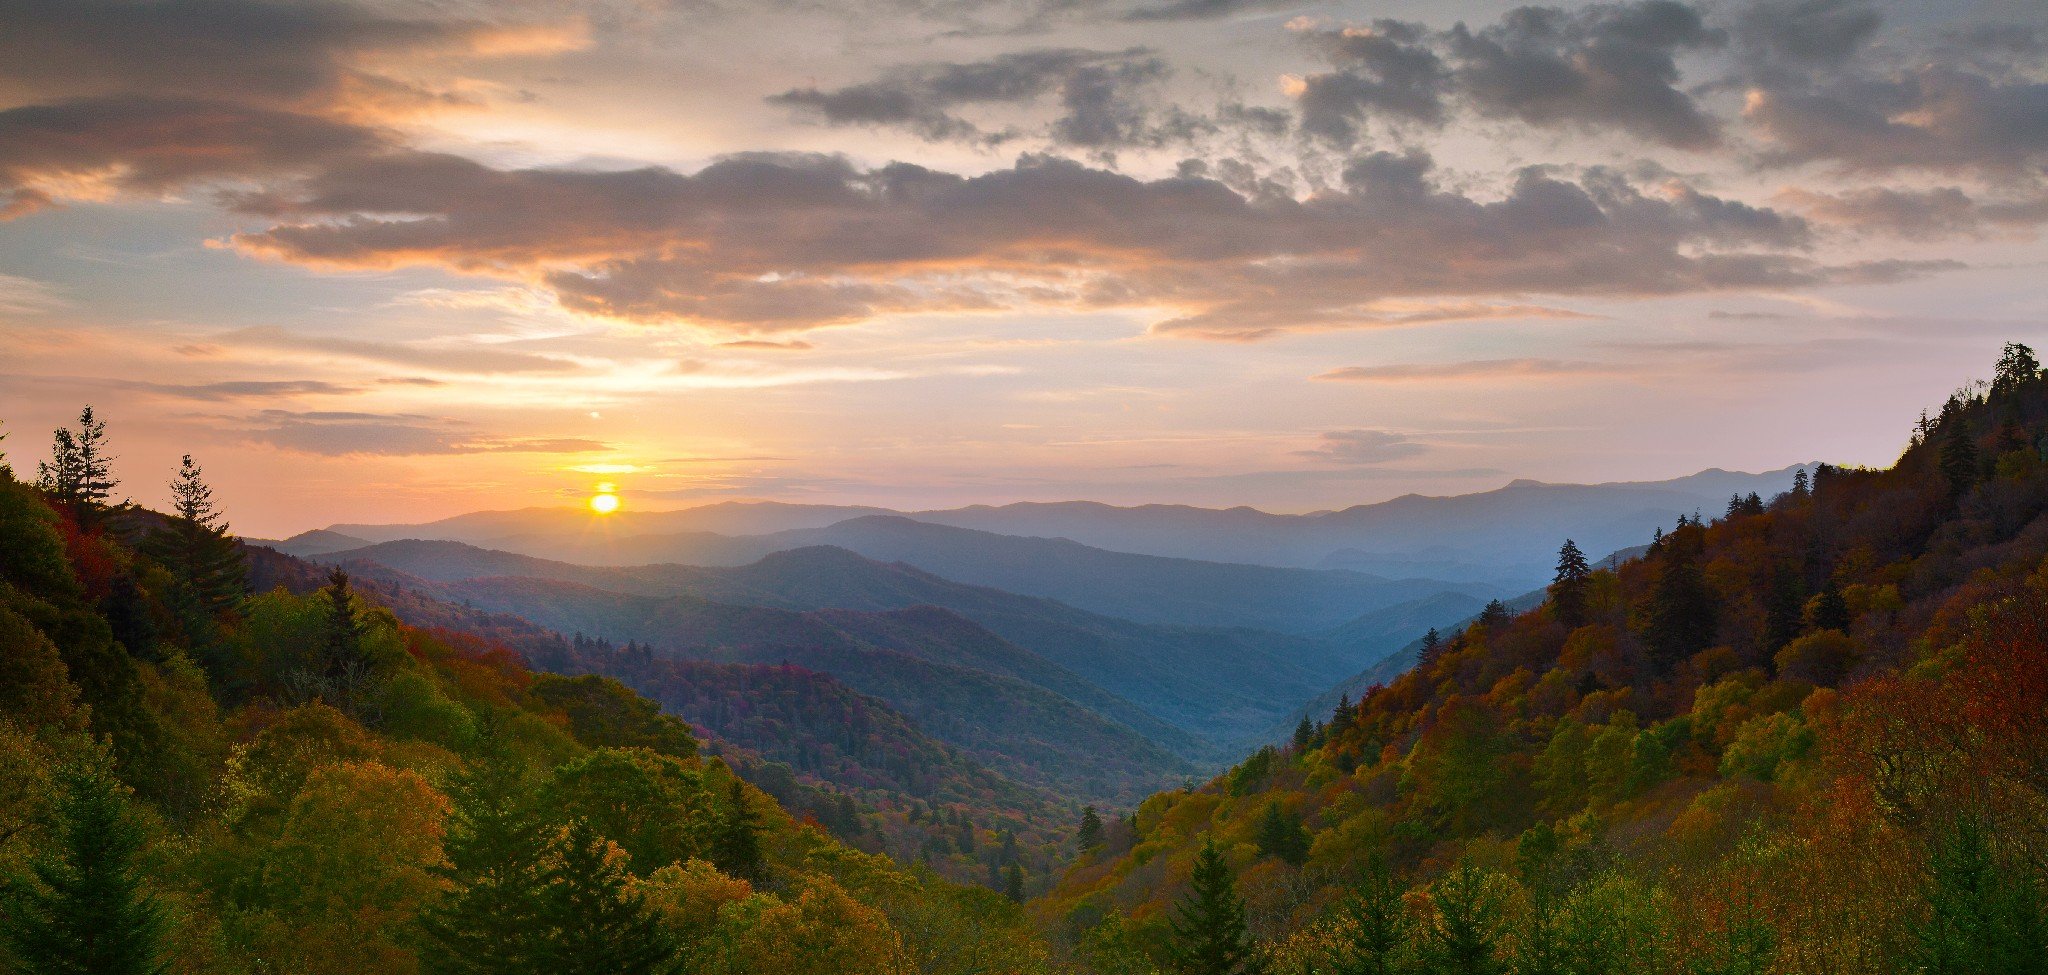 Highlands NC, Hiking Offers a Great Way to Enjoy the Outdoors